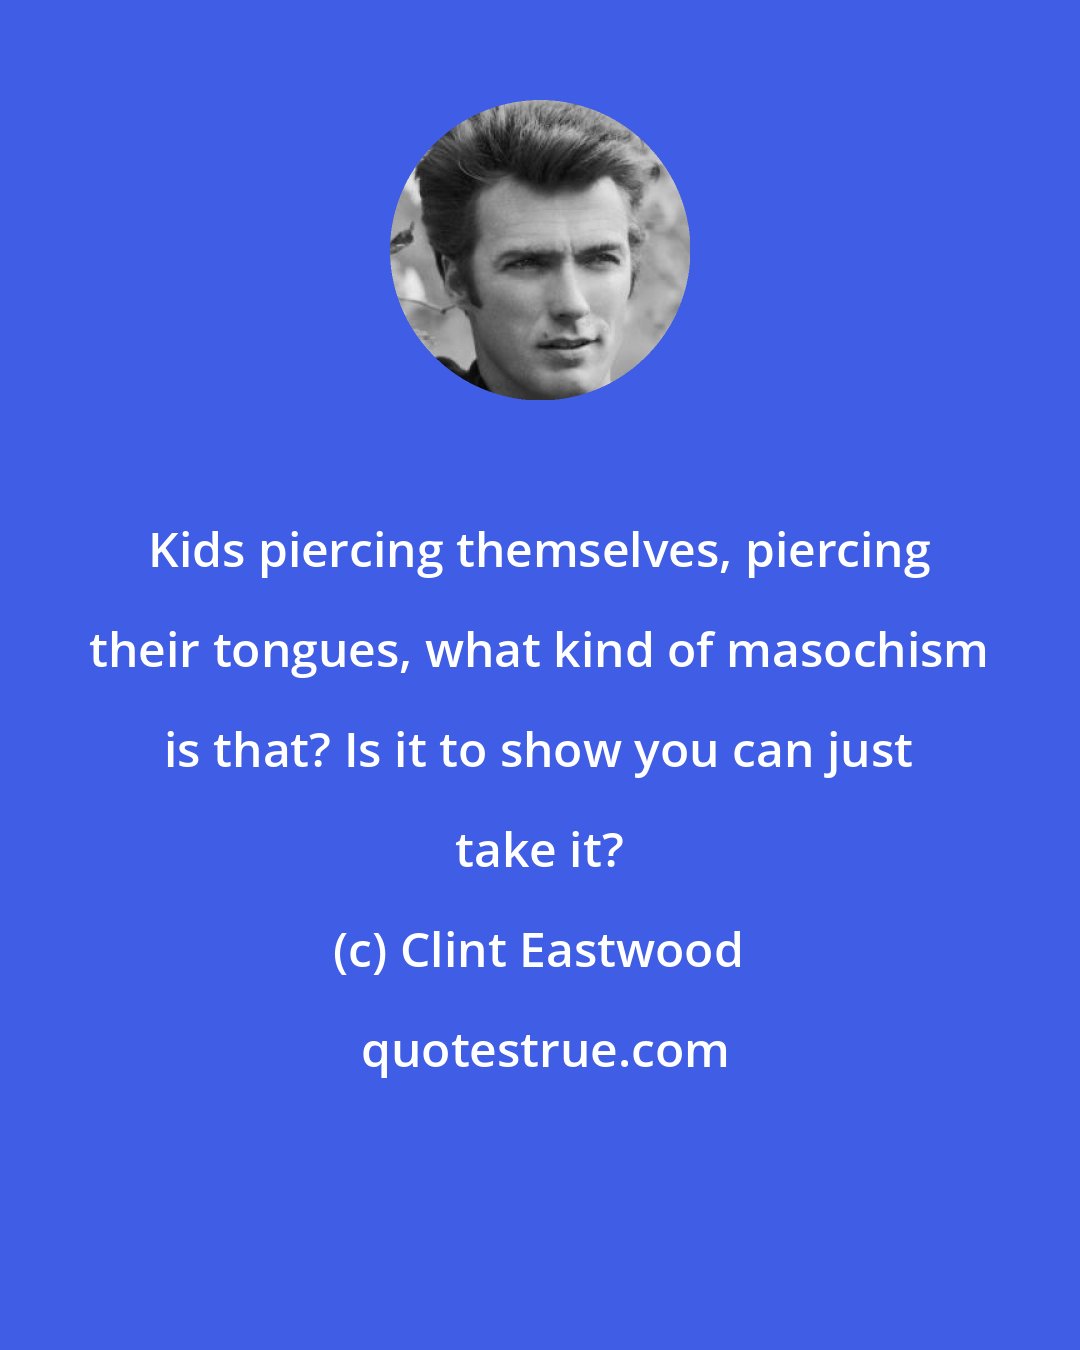 Clint Eastwood: Kids piercing themselves, piercing their tongues, what kind of masochism is that? Is it to show you can just take it?